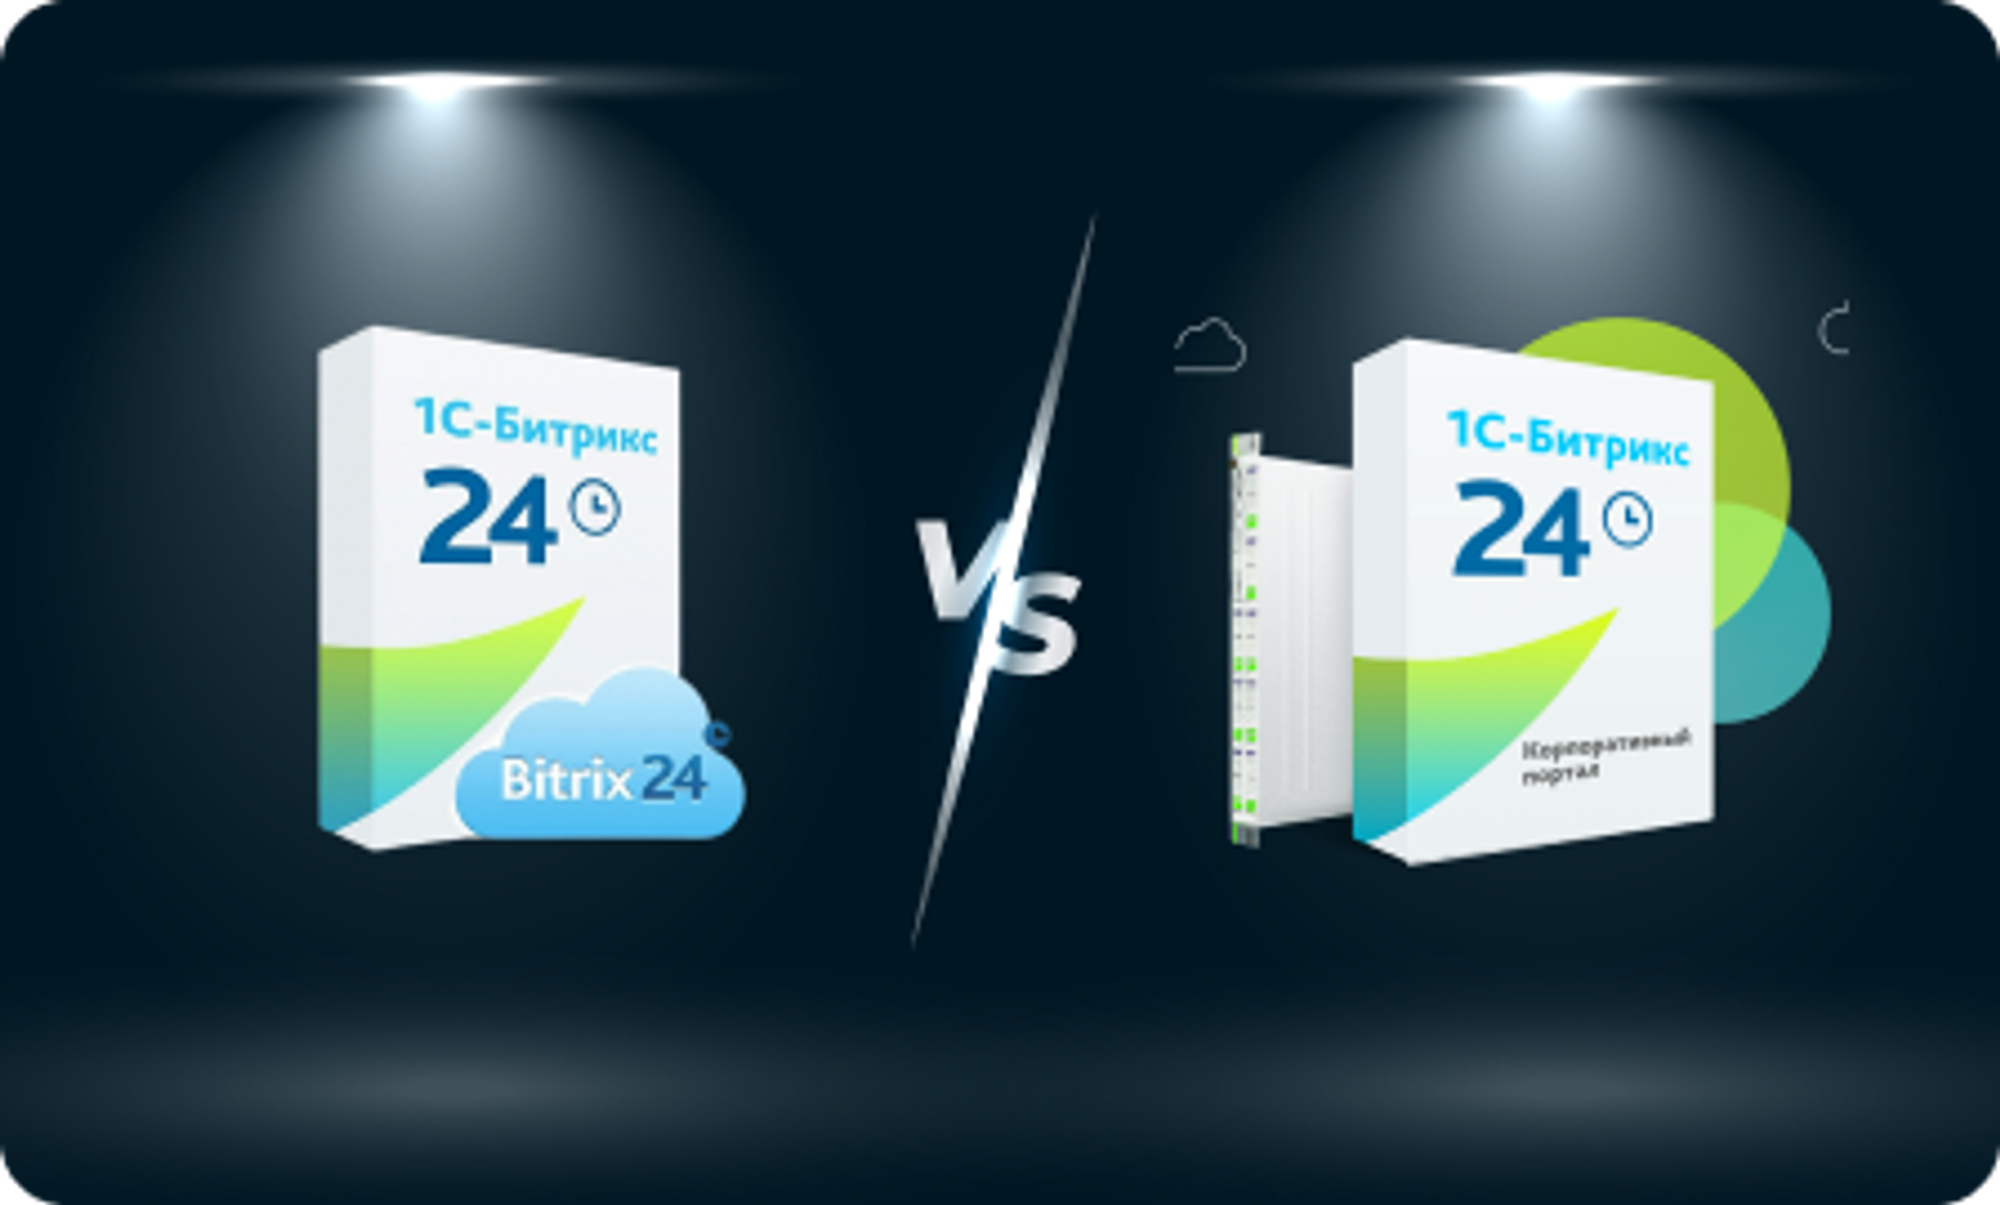 Comparison of cloud and boxed versions of Bitrix24